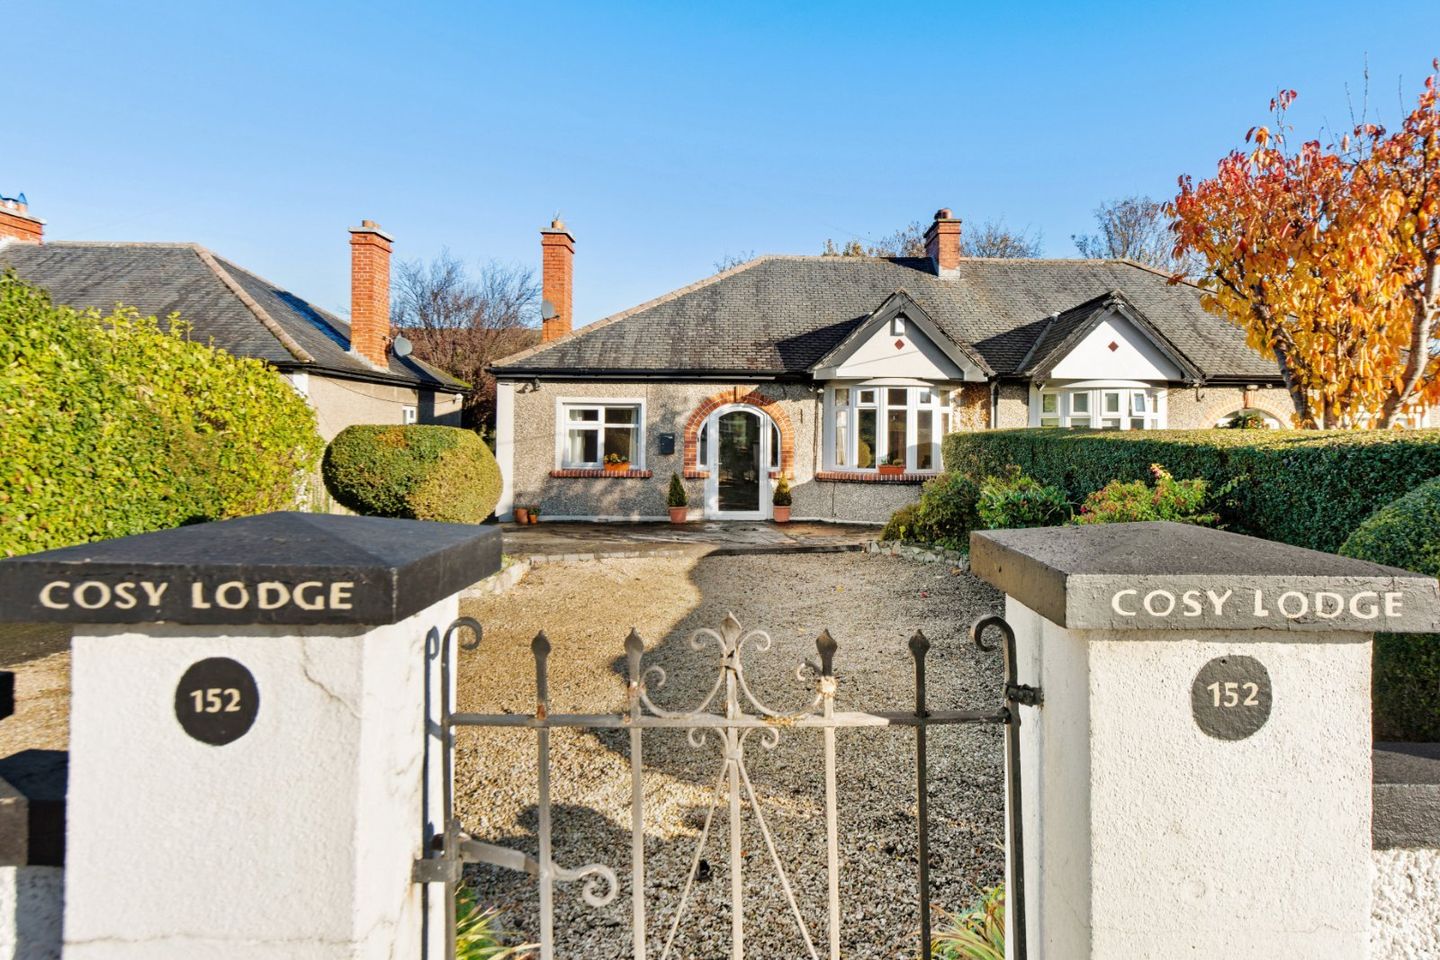 Cosy Lodge, Cosy Lodge, 152 Kimmage Road West, Kimmage, Dublin 12, D12HY23